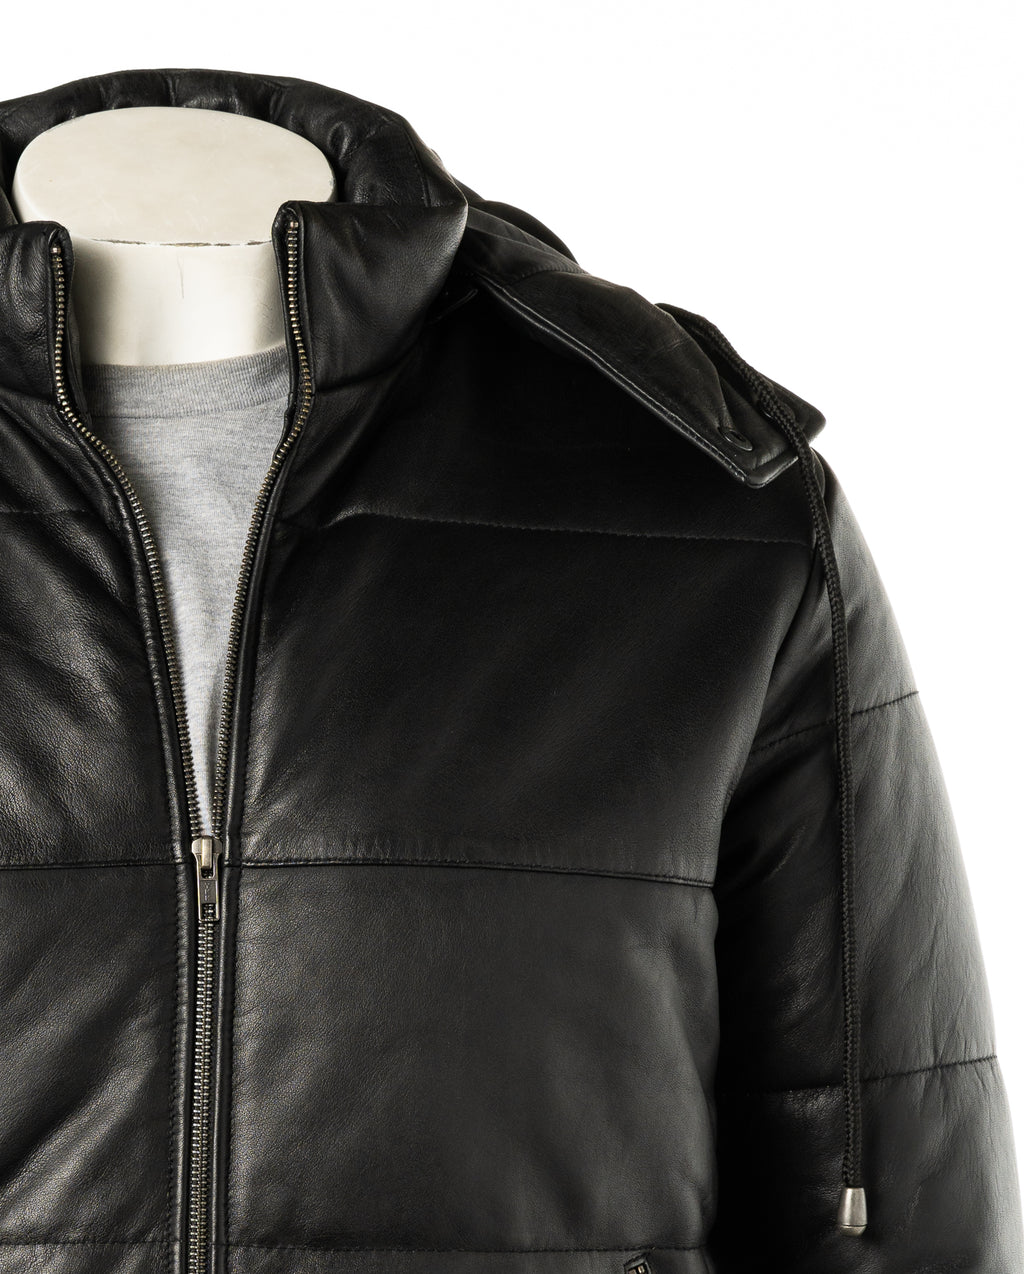 Men's Black Leather Puffer Jacket With Detachable Hood: Dino